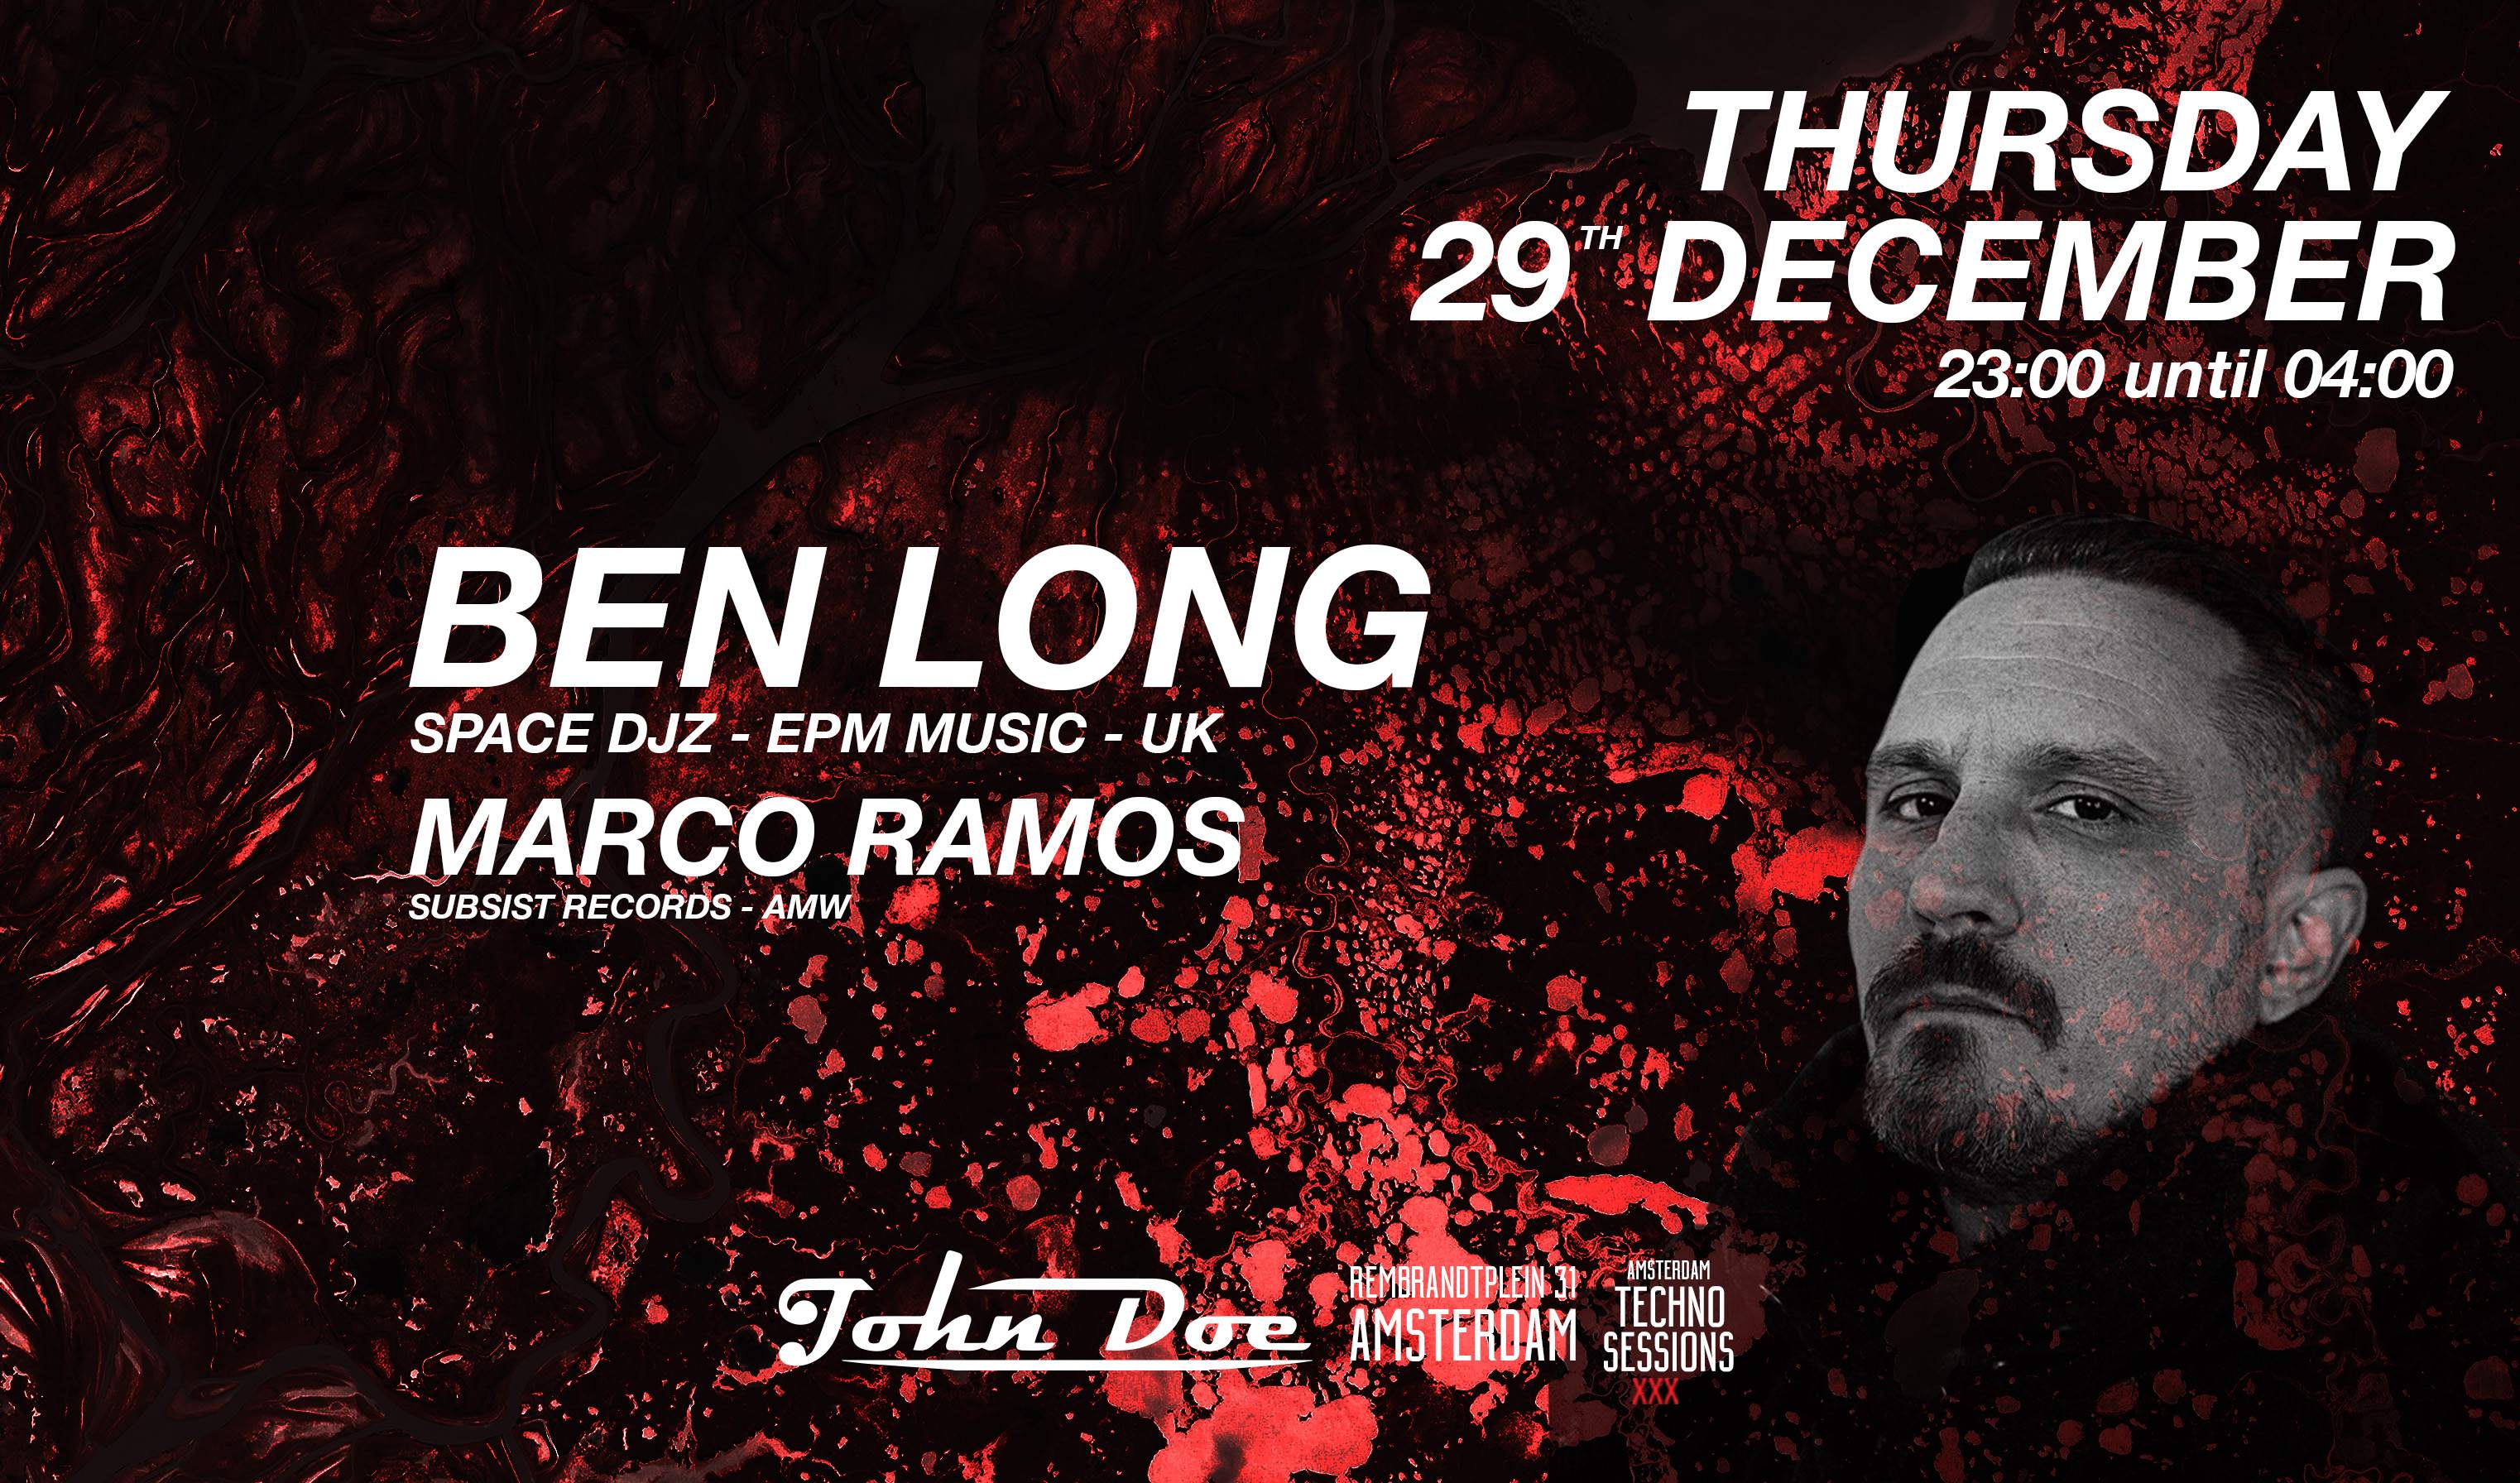 Amsterdam Techno Sessions with Ben Long (Space DJz - EPM Music) UK - フライヤー表